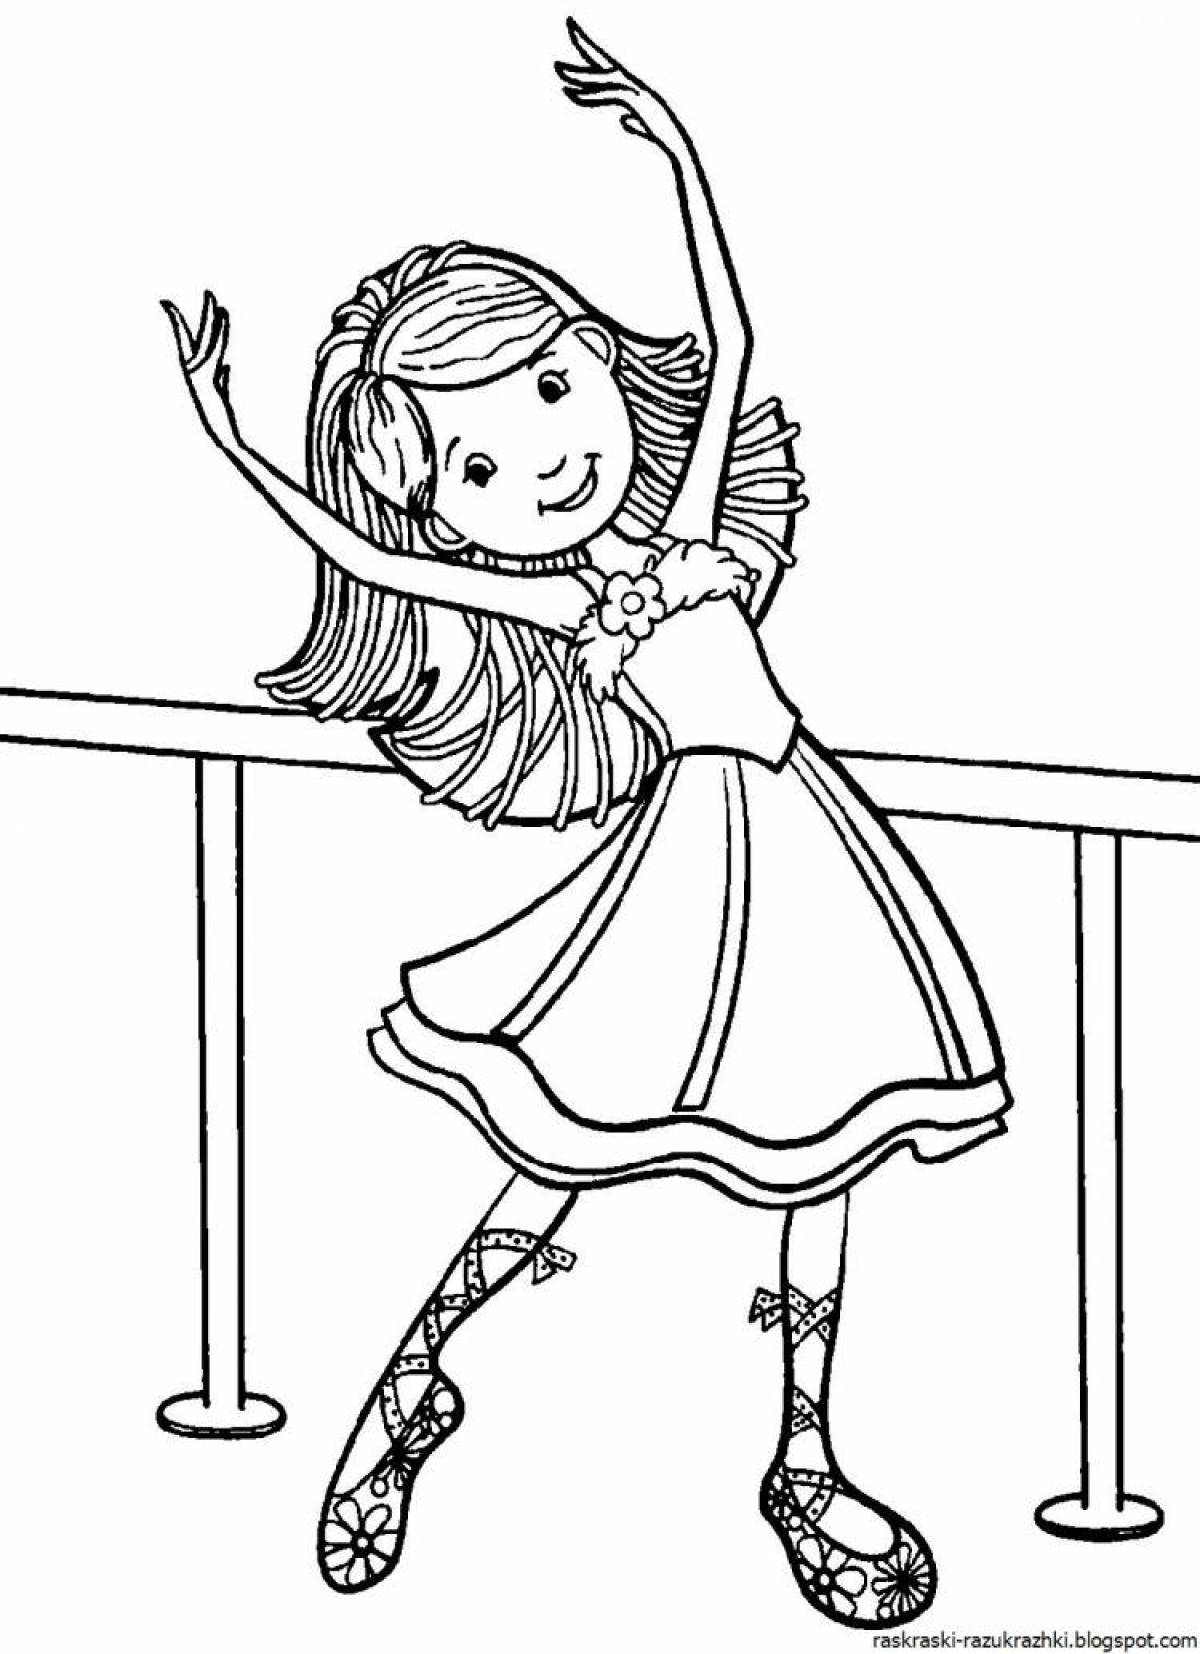 Adorable ballerina coloring page for kids